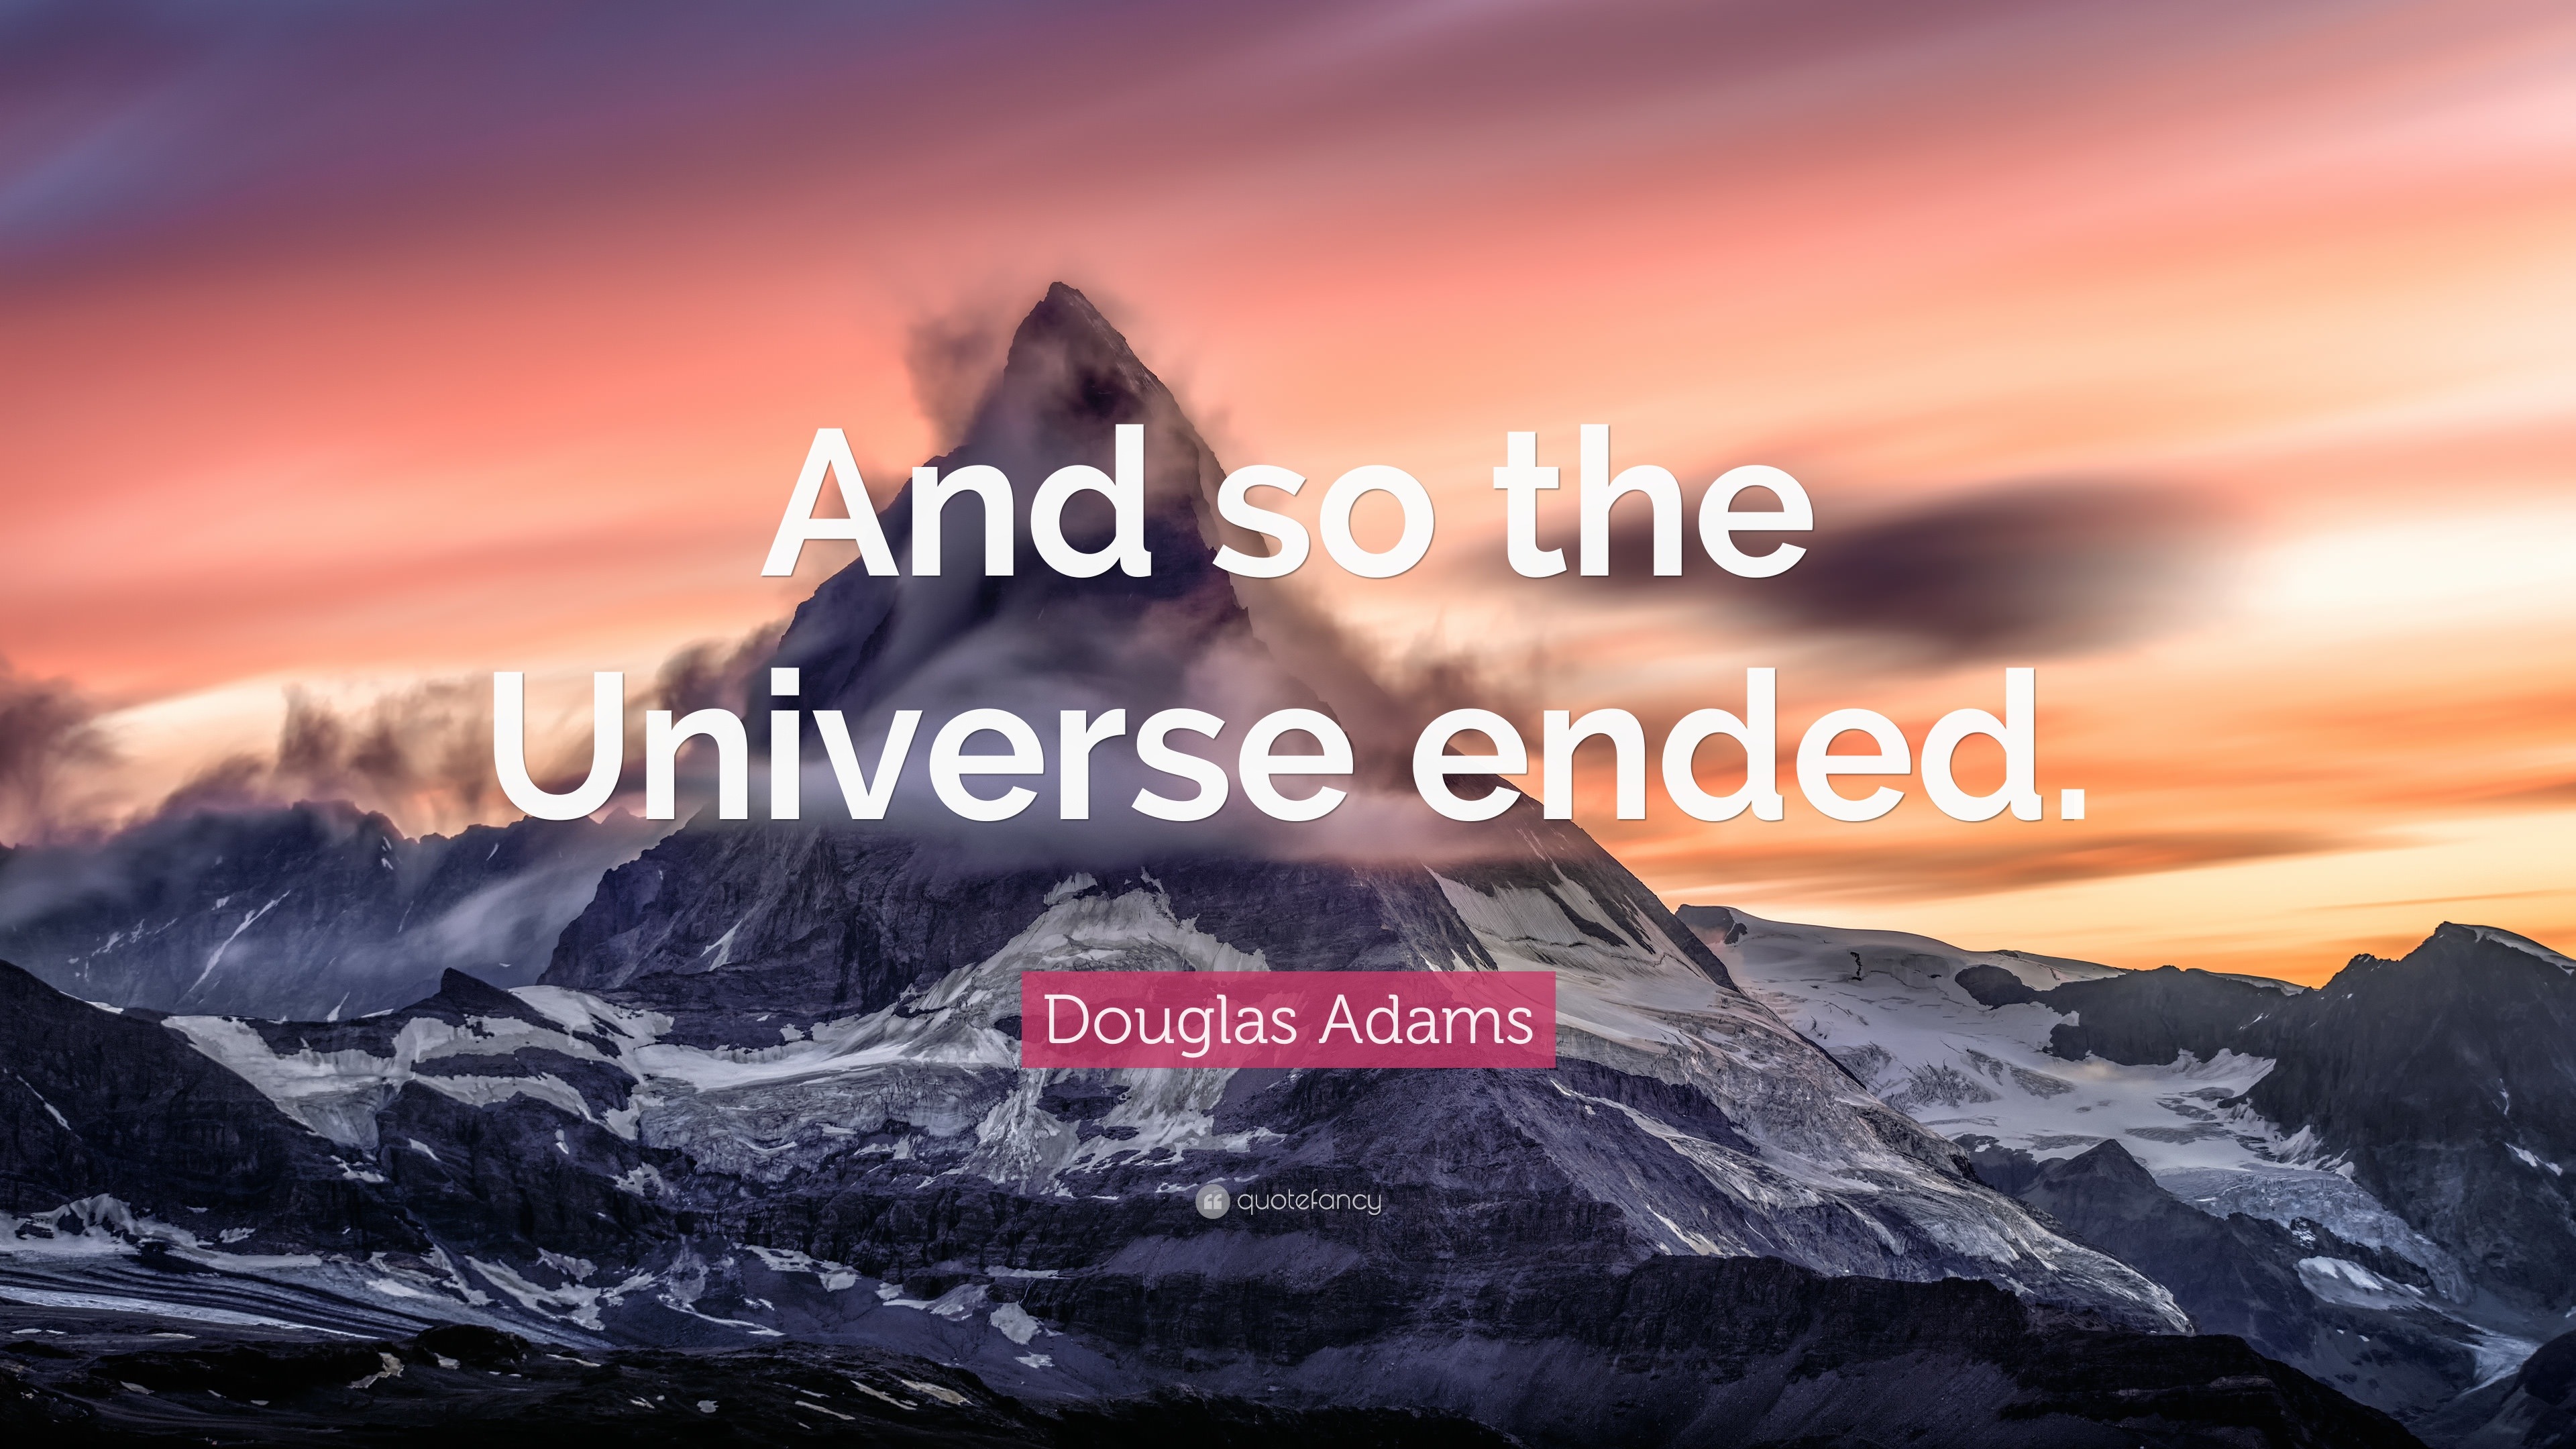 douglas adams quotes life the universe and everything